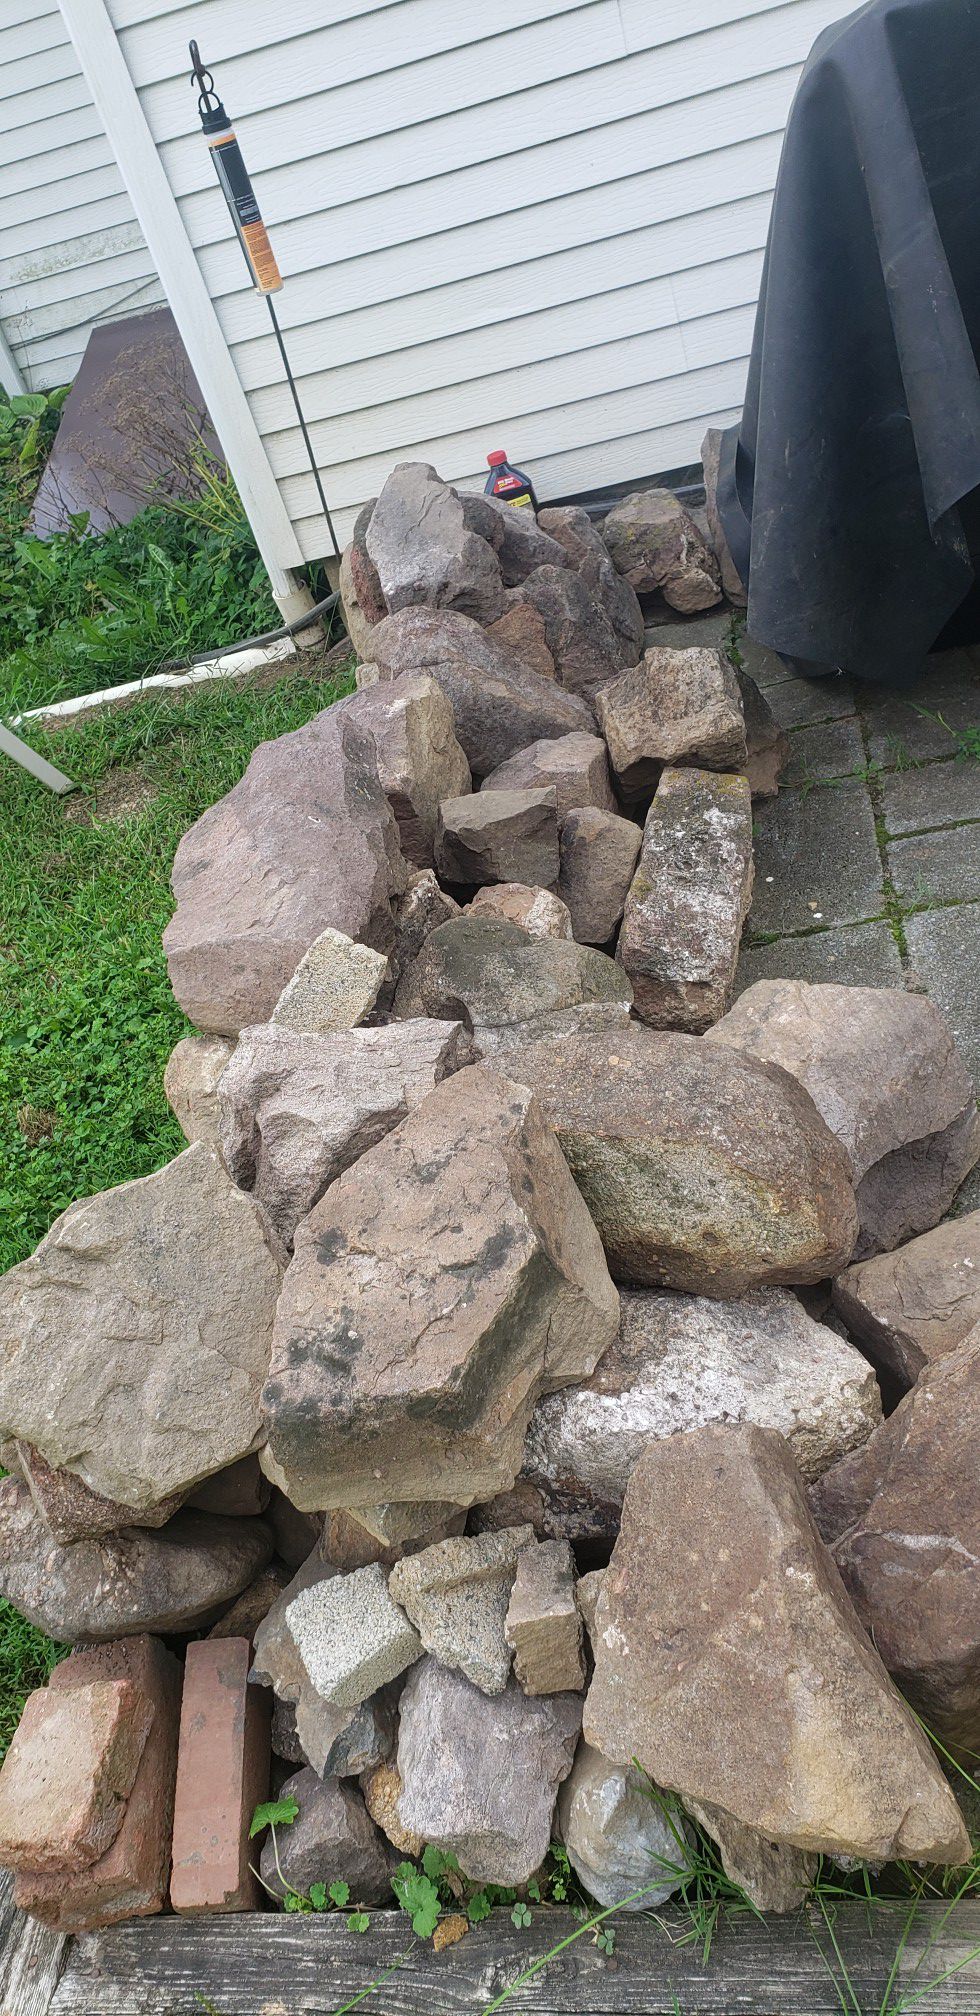 ROCKS LANDSCAPING OR WALL BUILD REDDISH IN COLOR